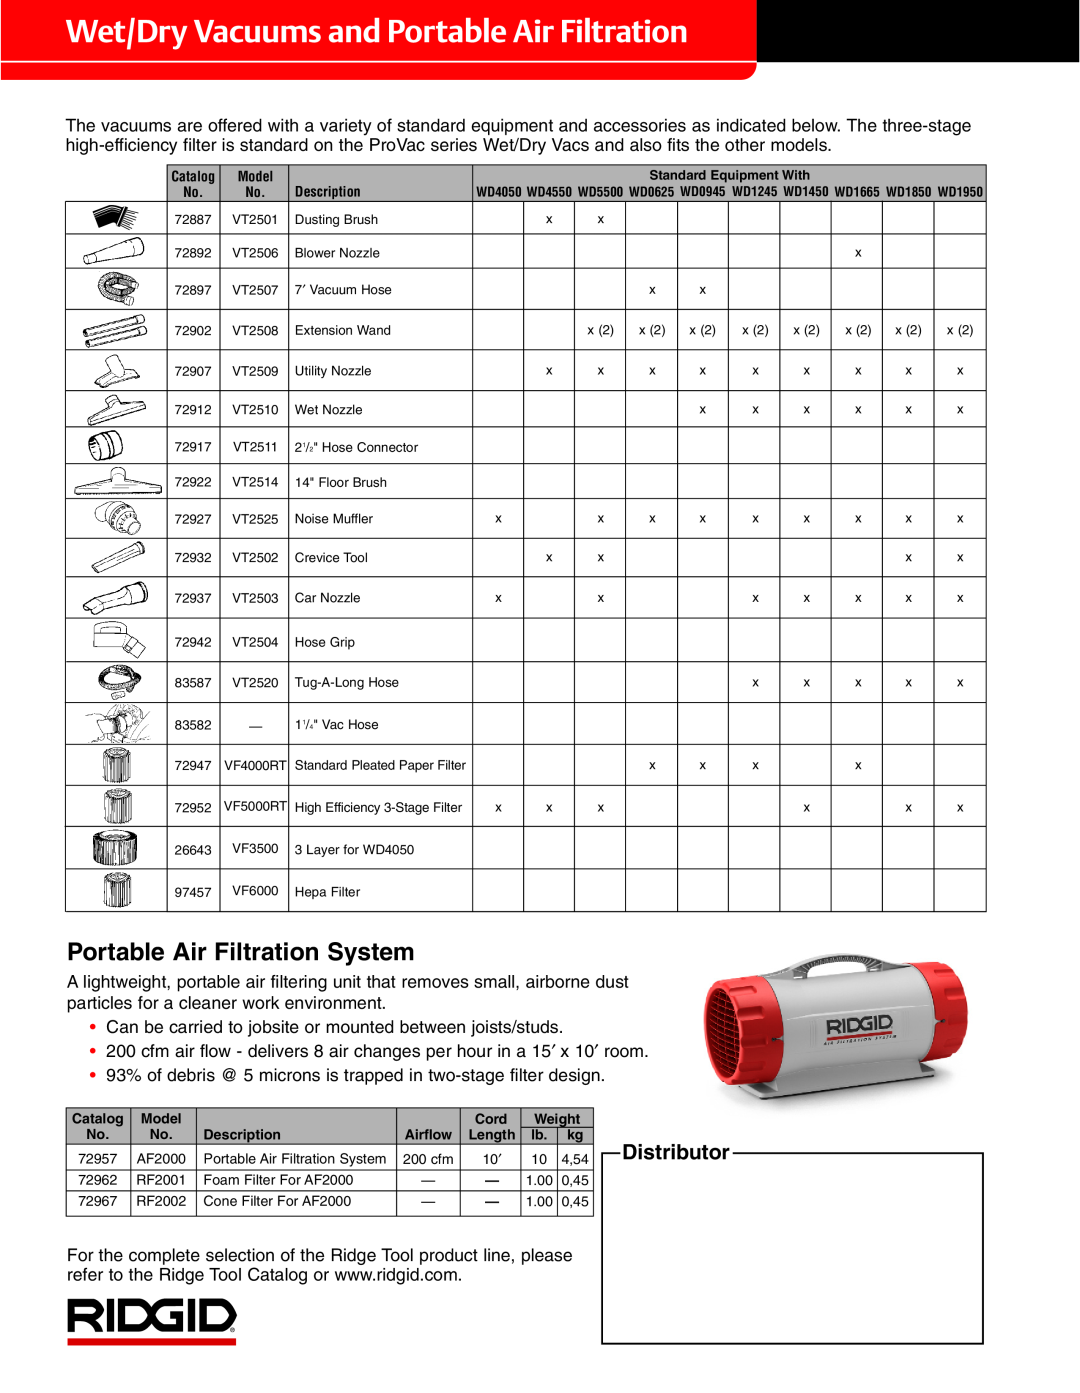 RIDGID VT2570, WD4050, WD4550 Wet/Dry Vacuums and Portable Air Filtration, Portable Air Filtration System, Distributor 